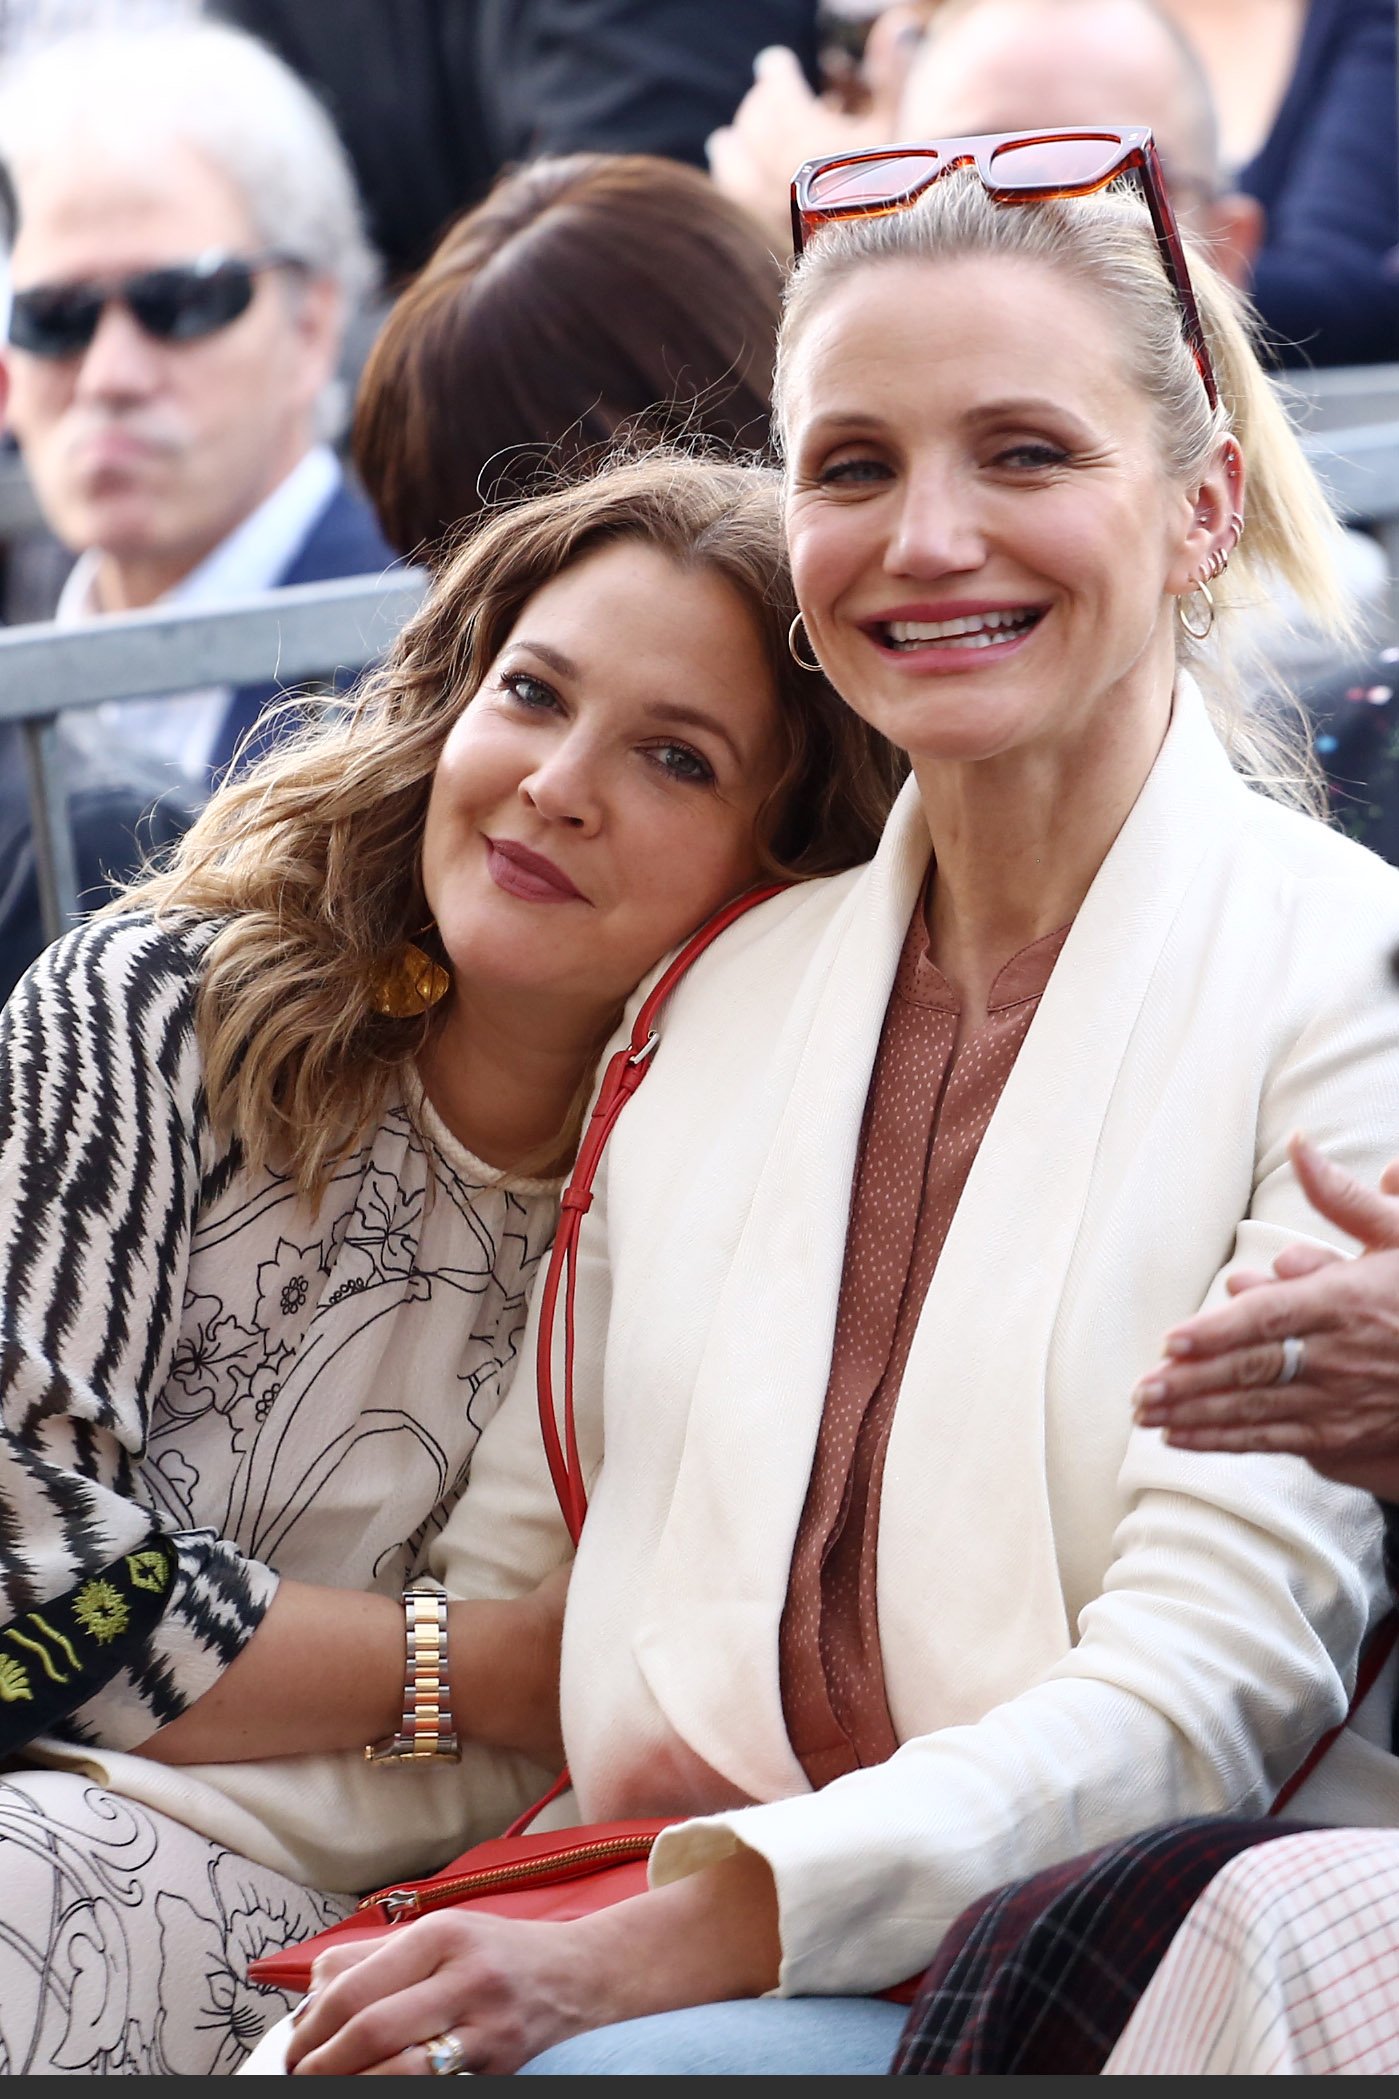 Drew Barrymore and Cameron Diaz attend a ceremony honoring Lucy Liu With Star On The Hollywood Walk Of Fame on May 1, 2019 in Hollywood, California. | Source: Getty Images